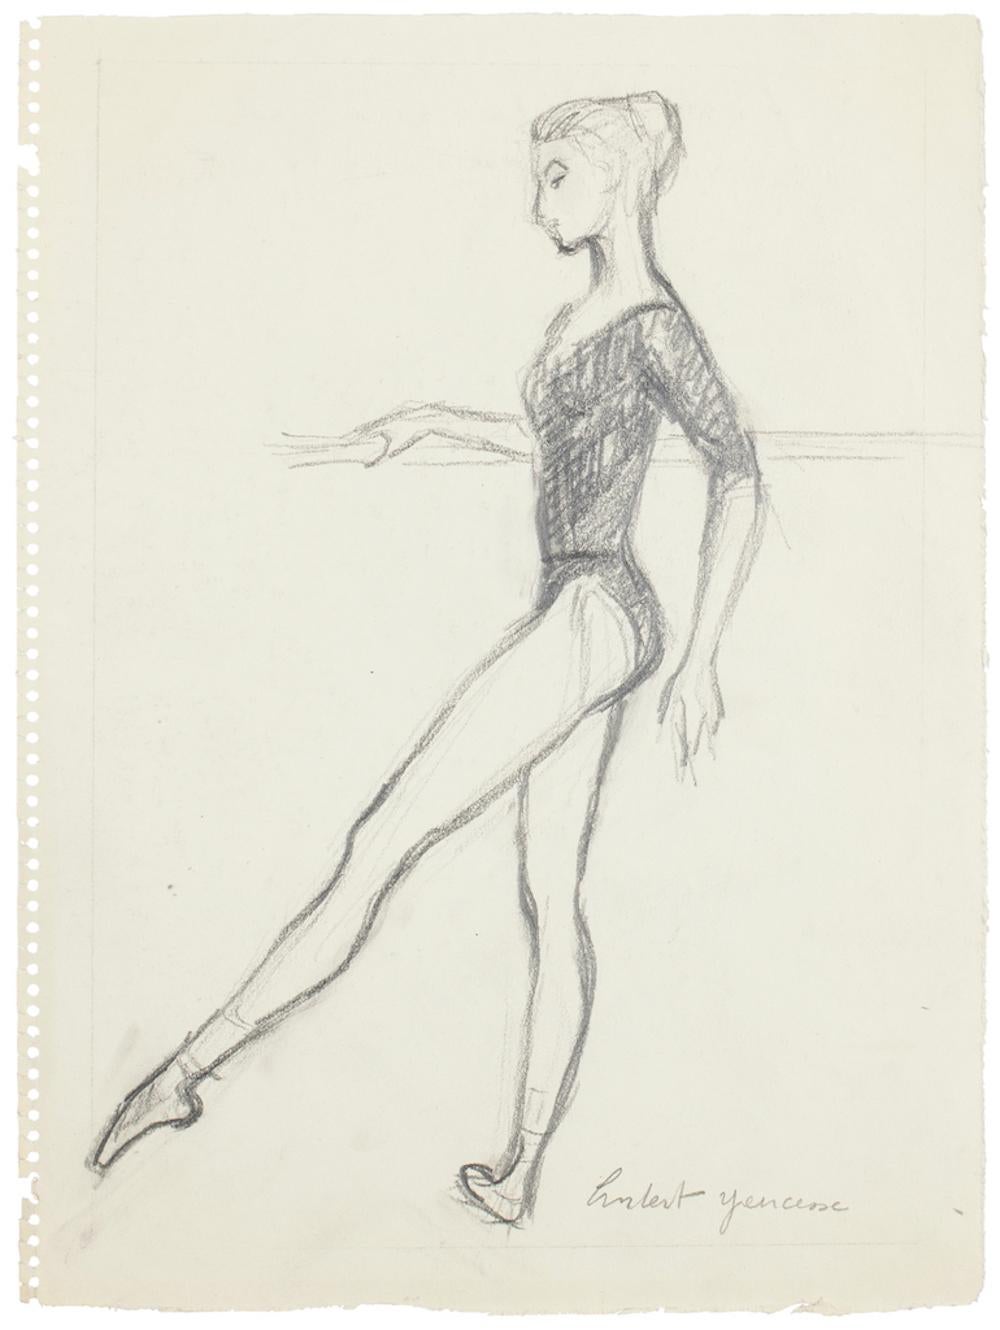 Ballet Dancers - Set of 15 Pencil and Charcoal Drawings by H. Yencesse - 1951 - Art by Hubert Yencesse